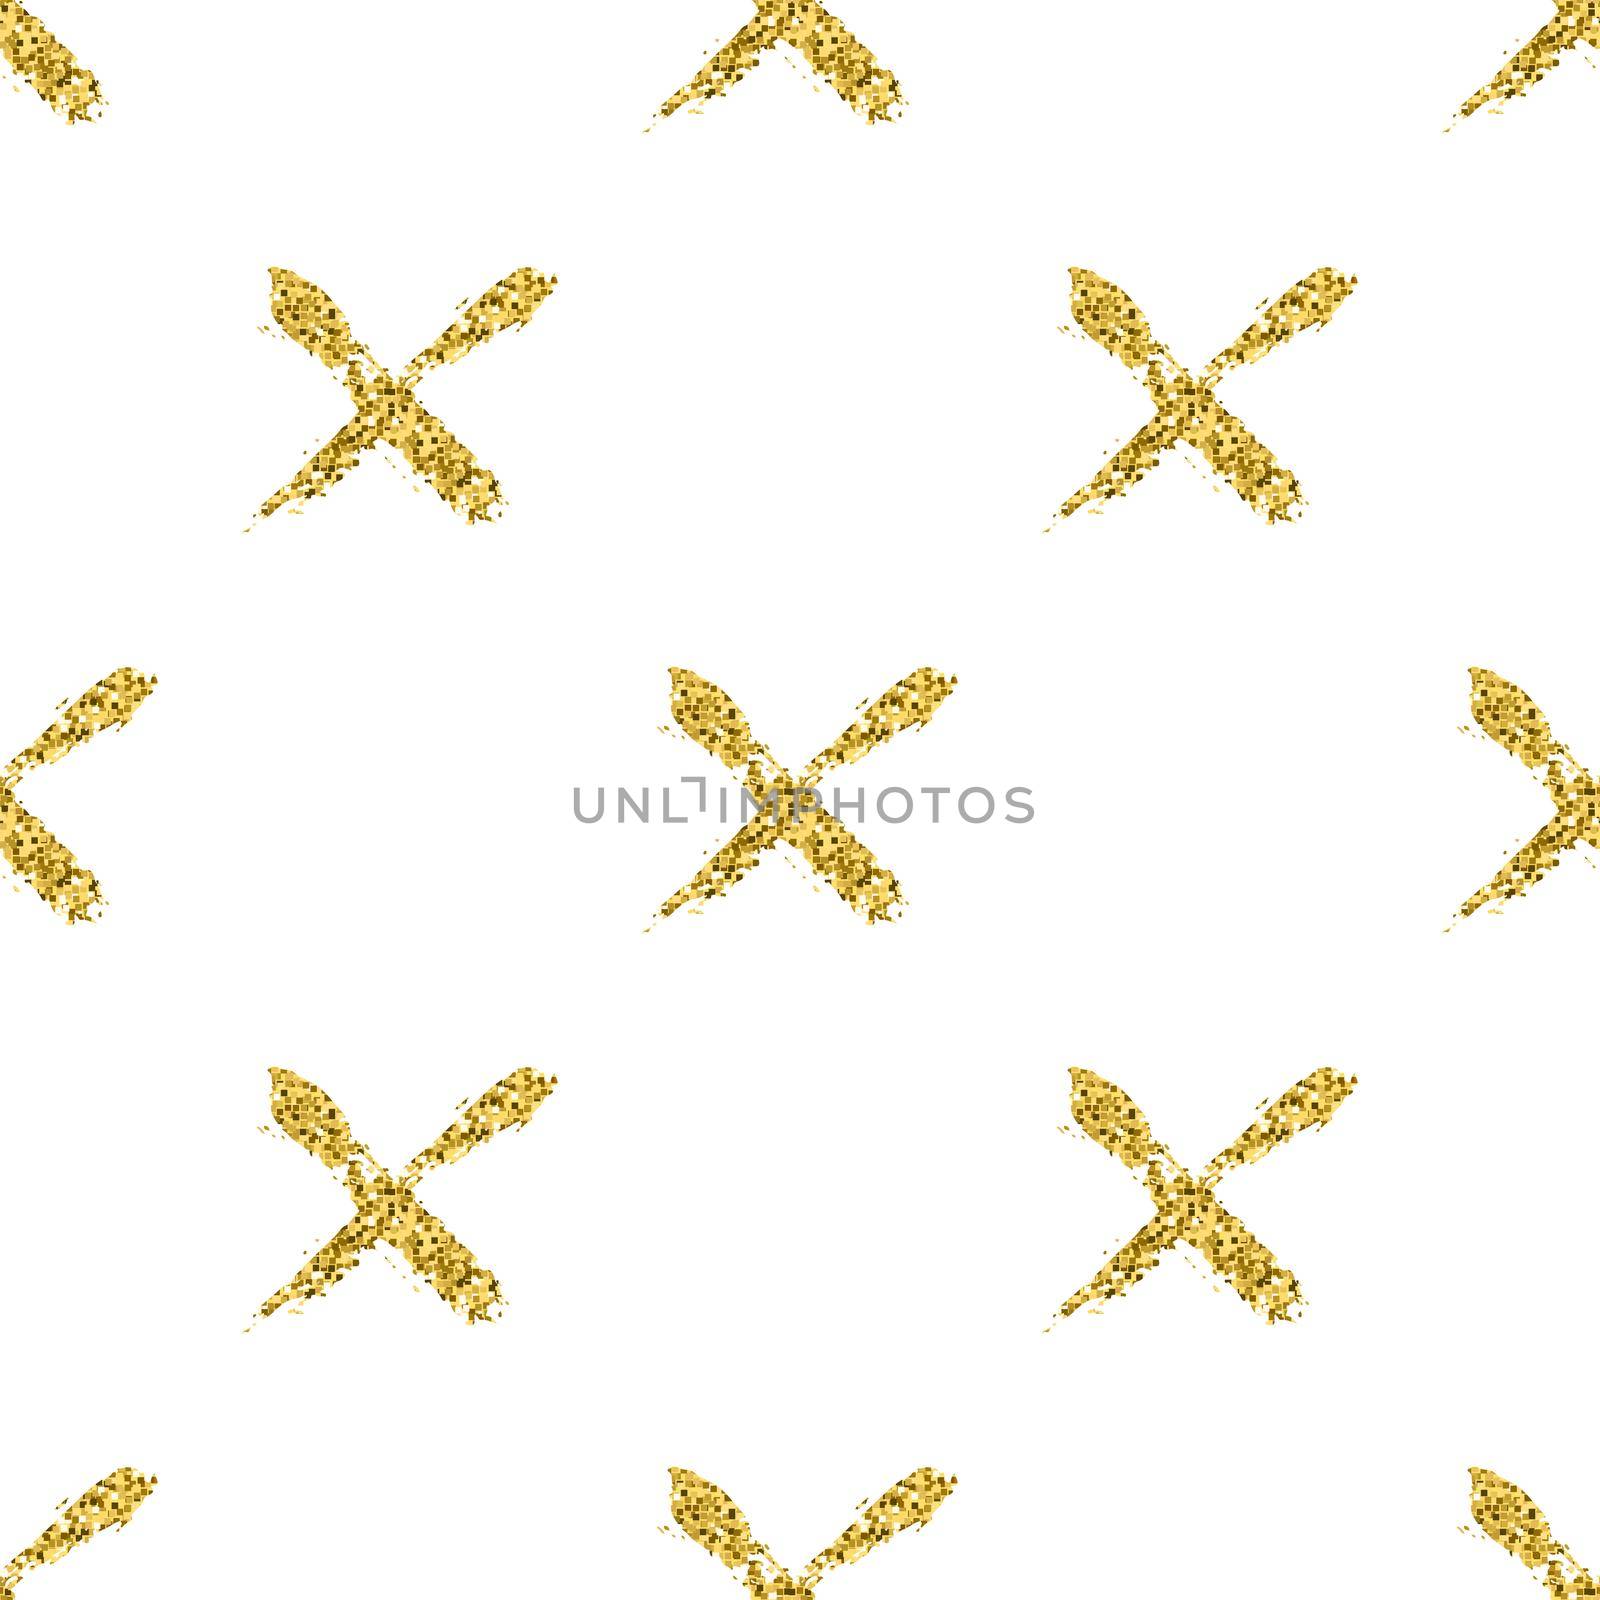 Modern seamless pattern with brush shiny cross. Gold metallic color on white background. Golden glitter texture. Ink geometric elements. Fashion catwalk style. Repeat fabric cloth print, textile.